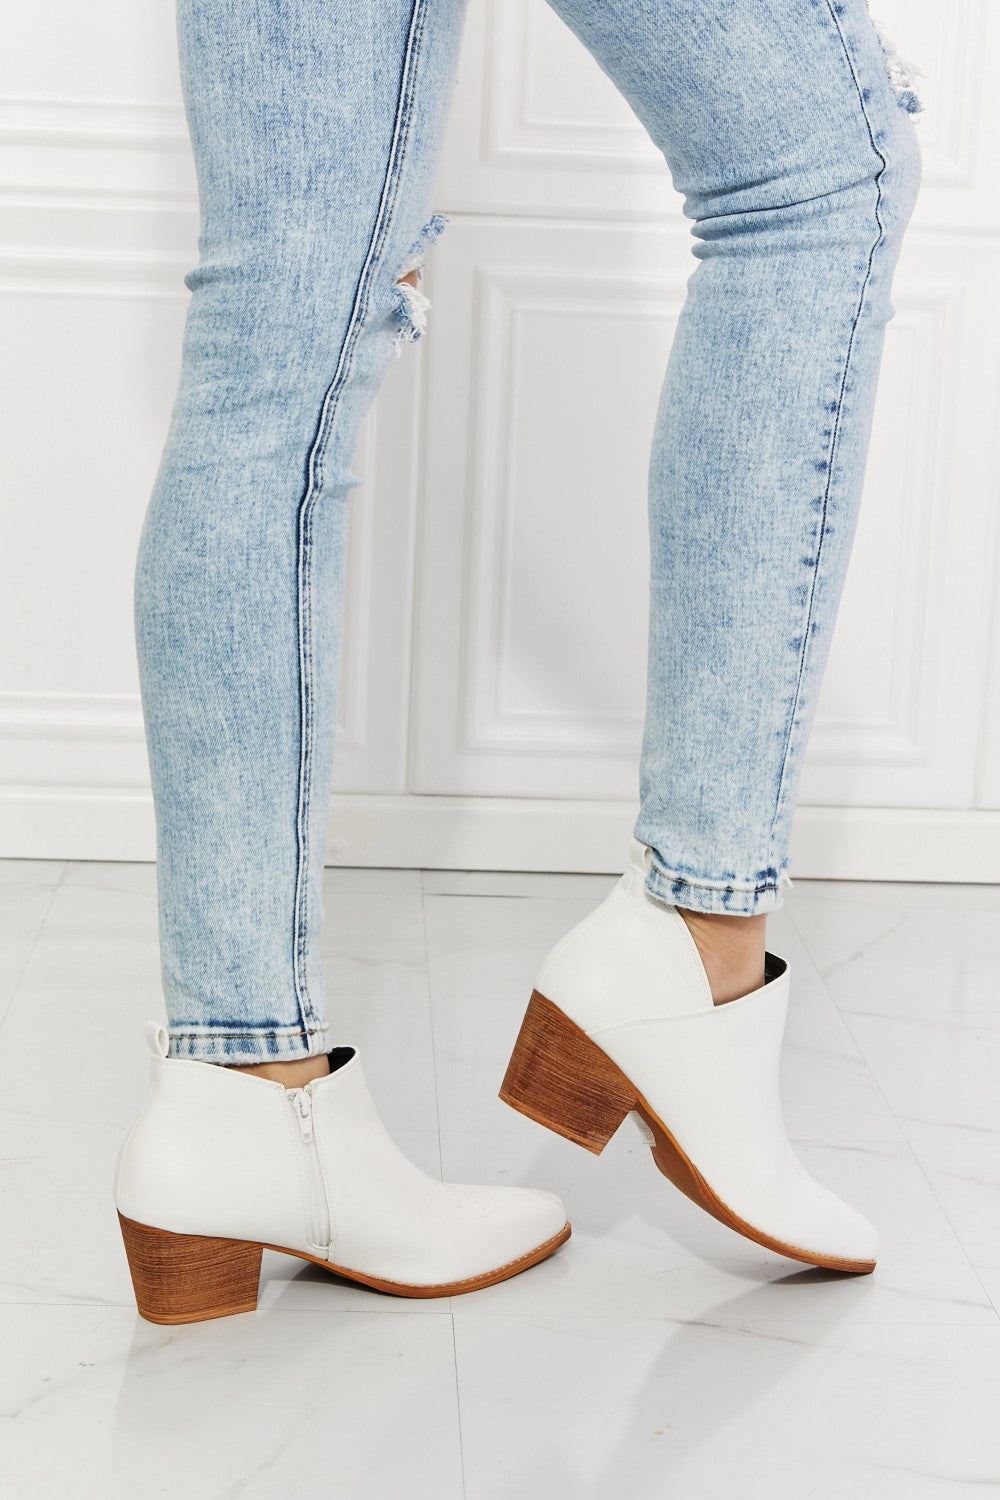 MMShoes Trust Yourself Embroidered Crossover Cowboy Bootie in White